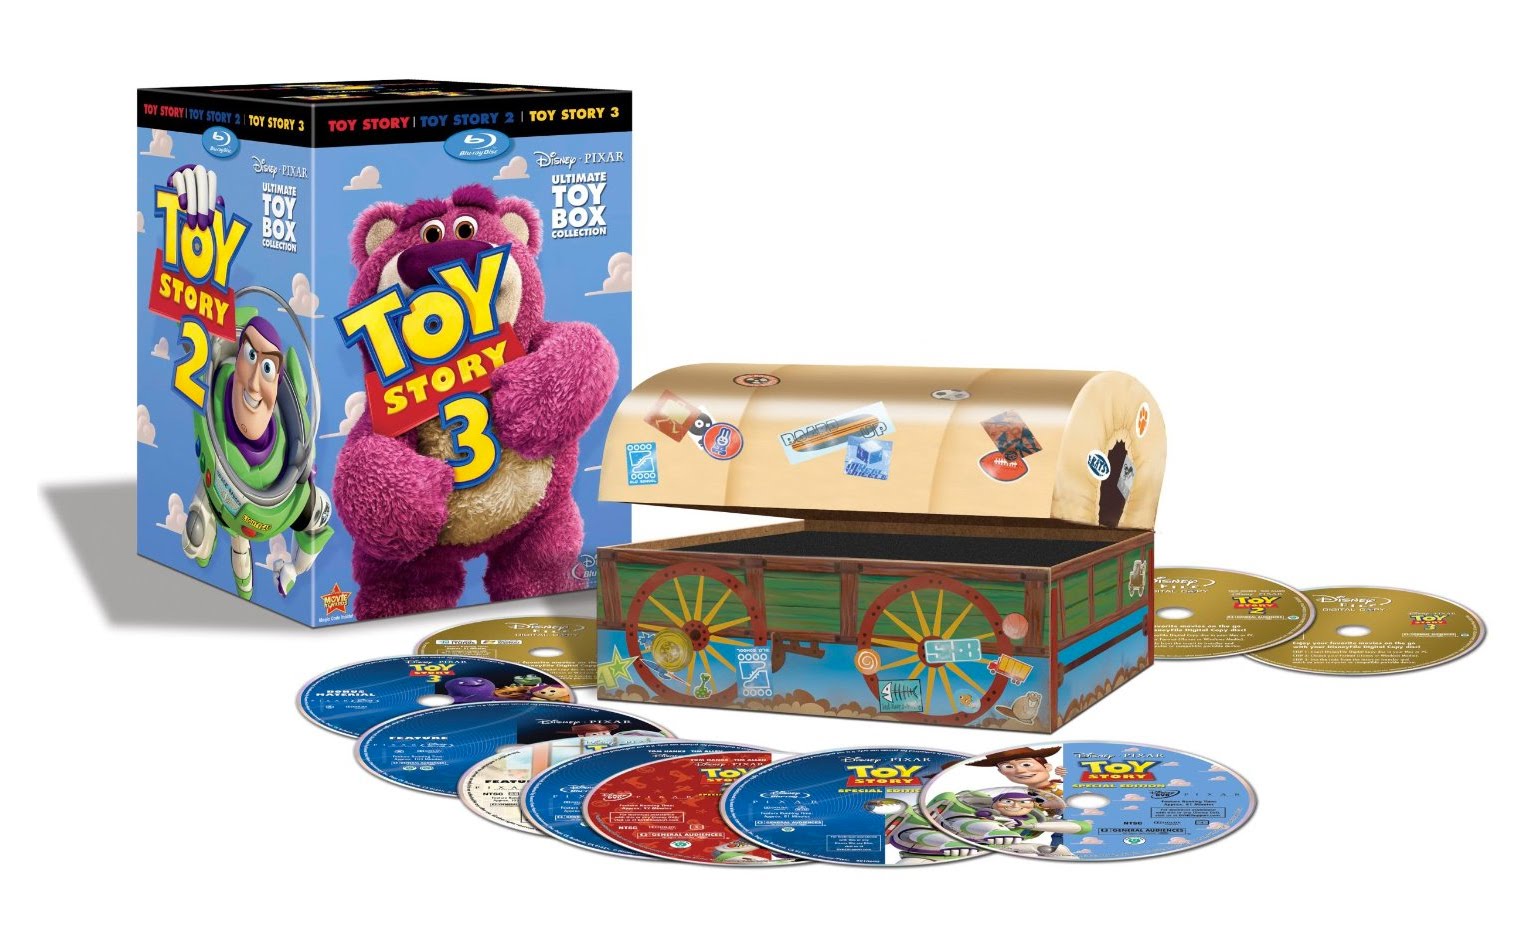 Toy+Story_DVD_Blu-ray_Ultimate_Toy_Box_Collection.jpg